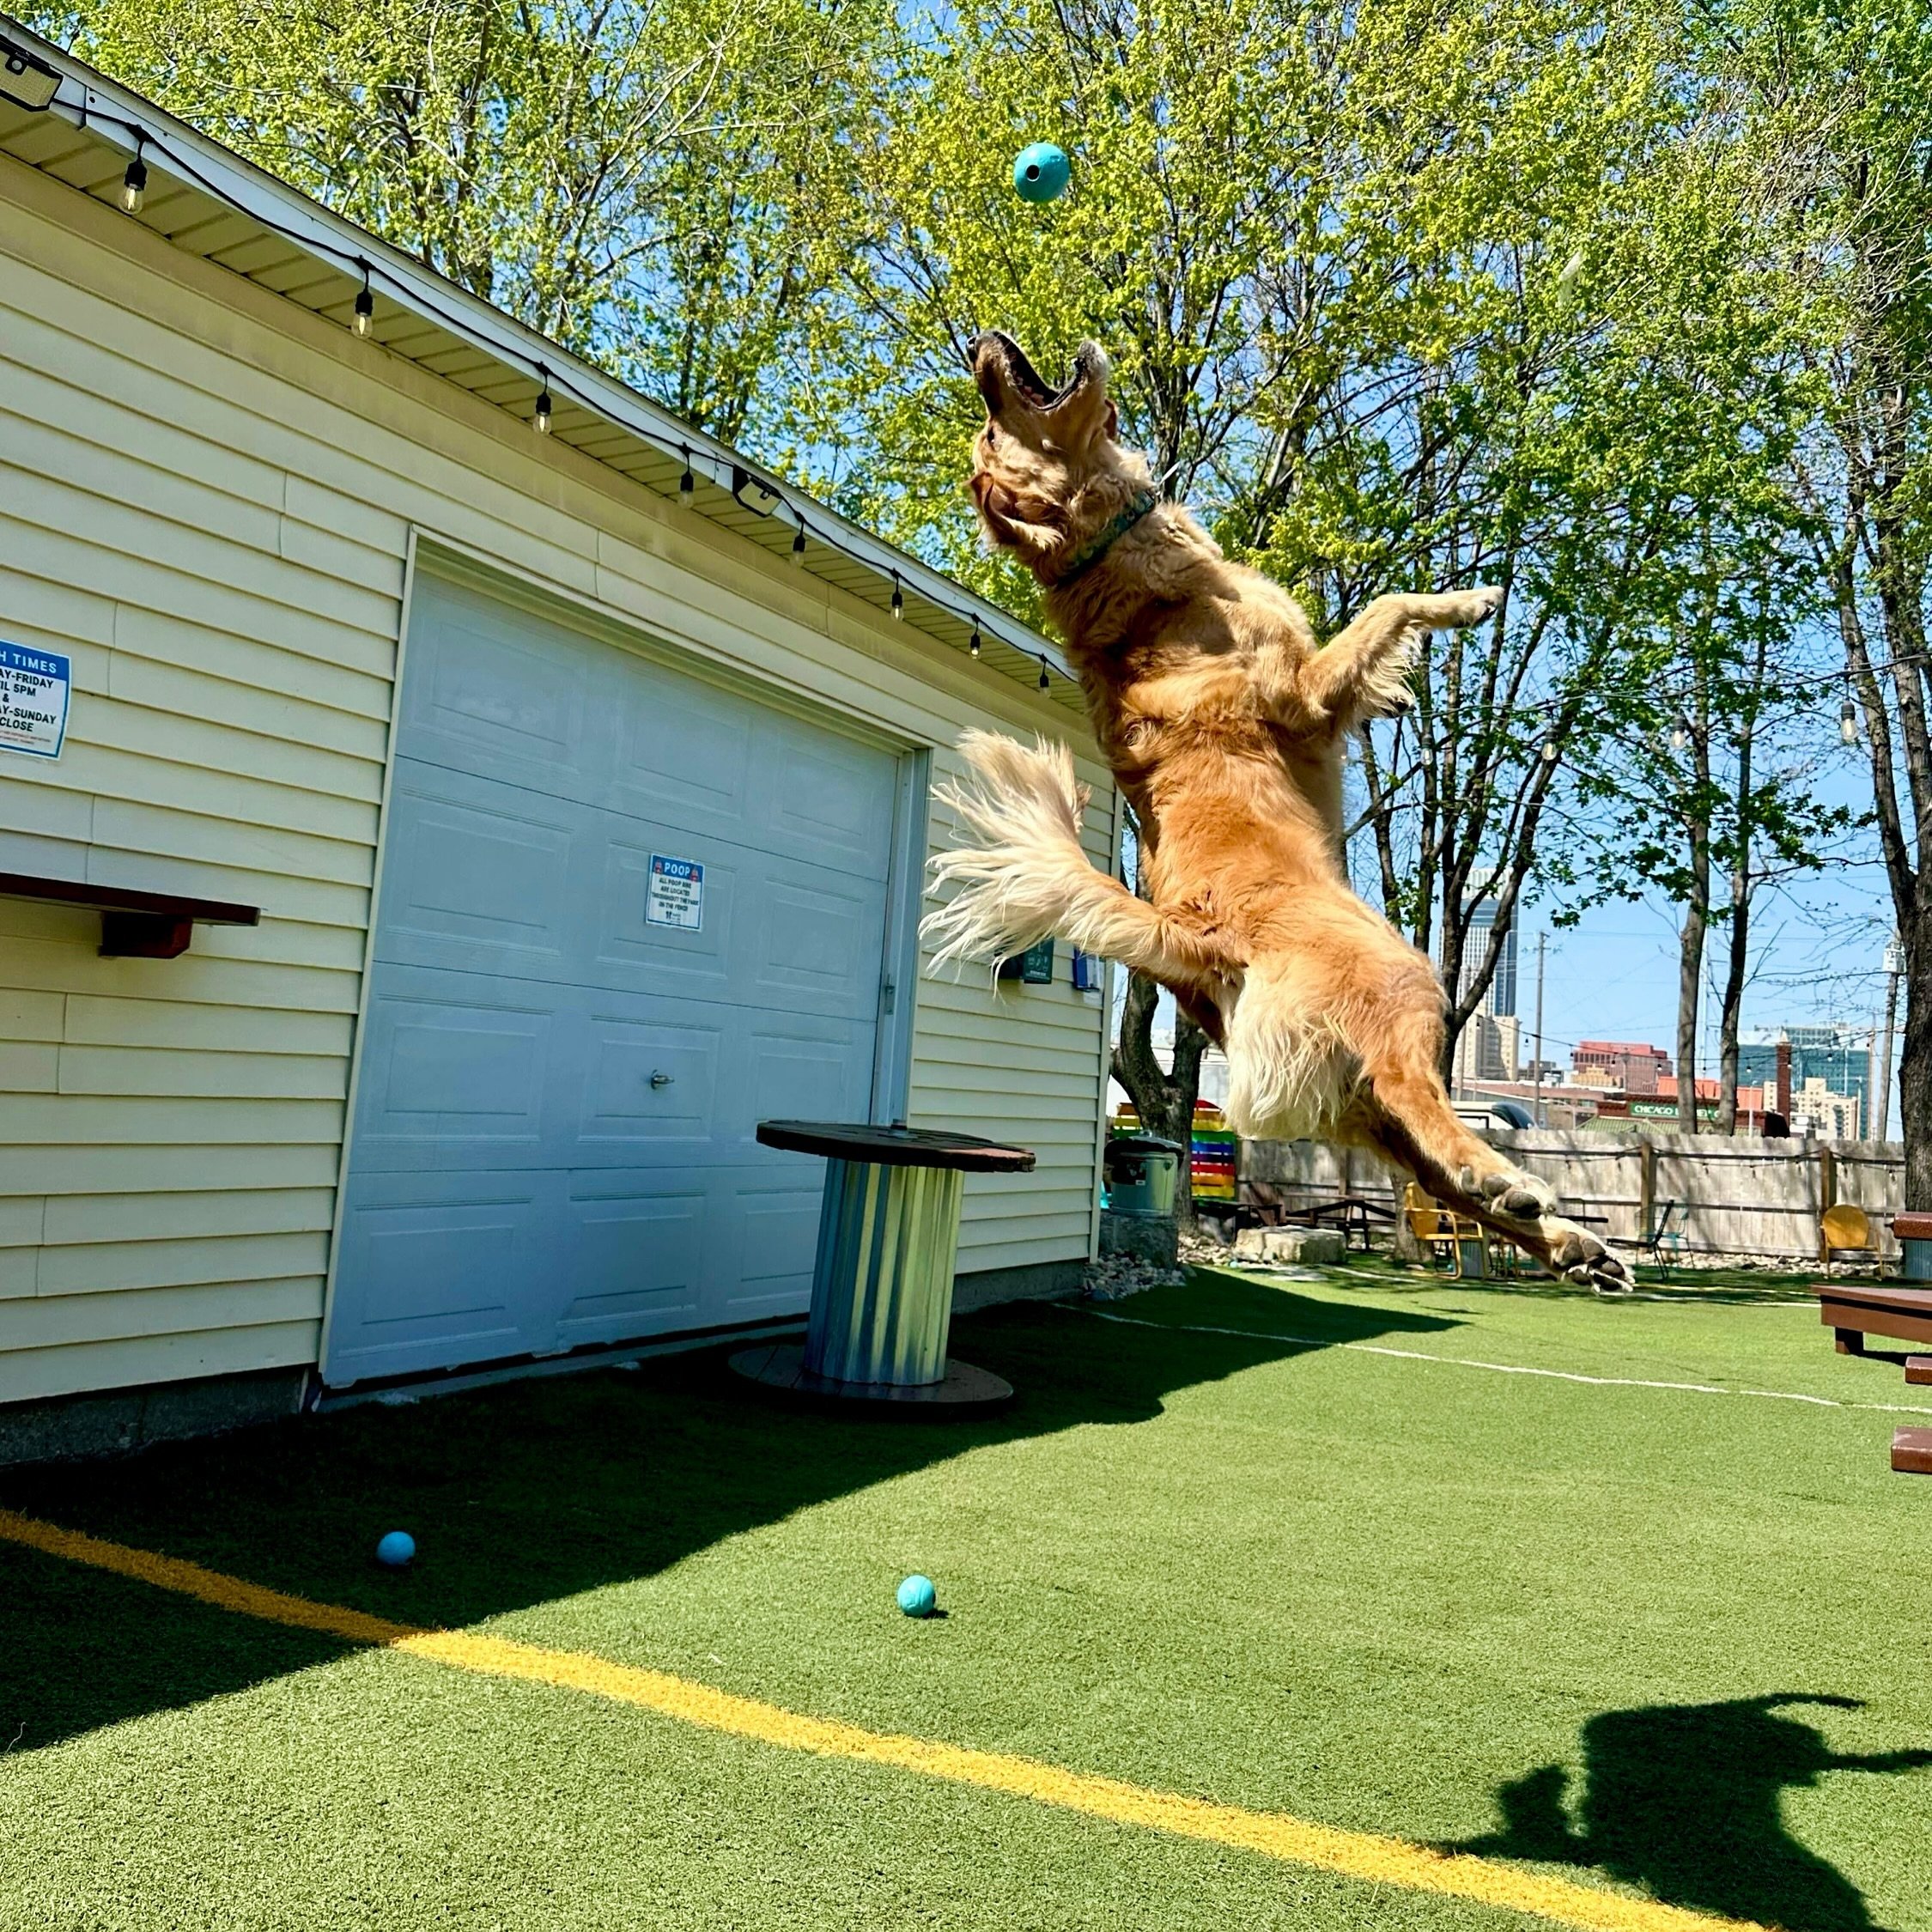 We can see clearly now the rain is gone! ☀️ For realz, check out Becker jumping for joy over here!Open 3-8PM. See you soon! 🍕🍻🐾